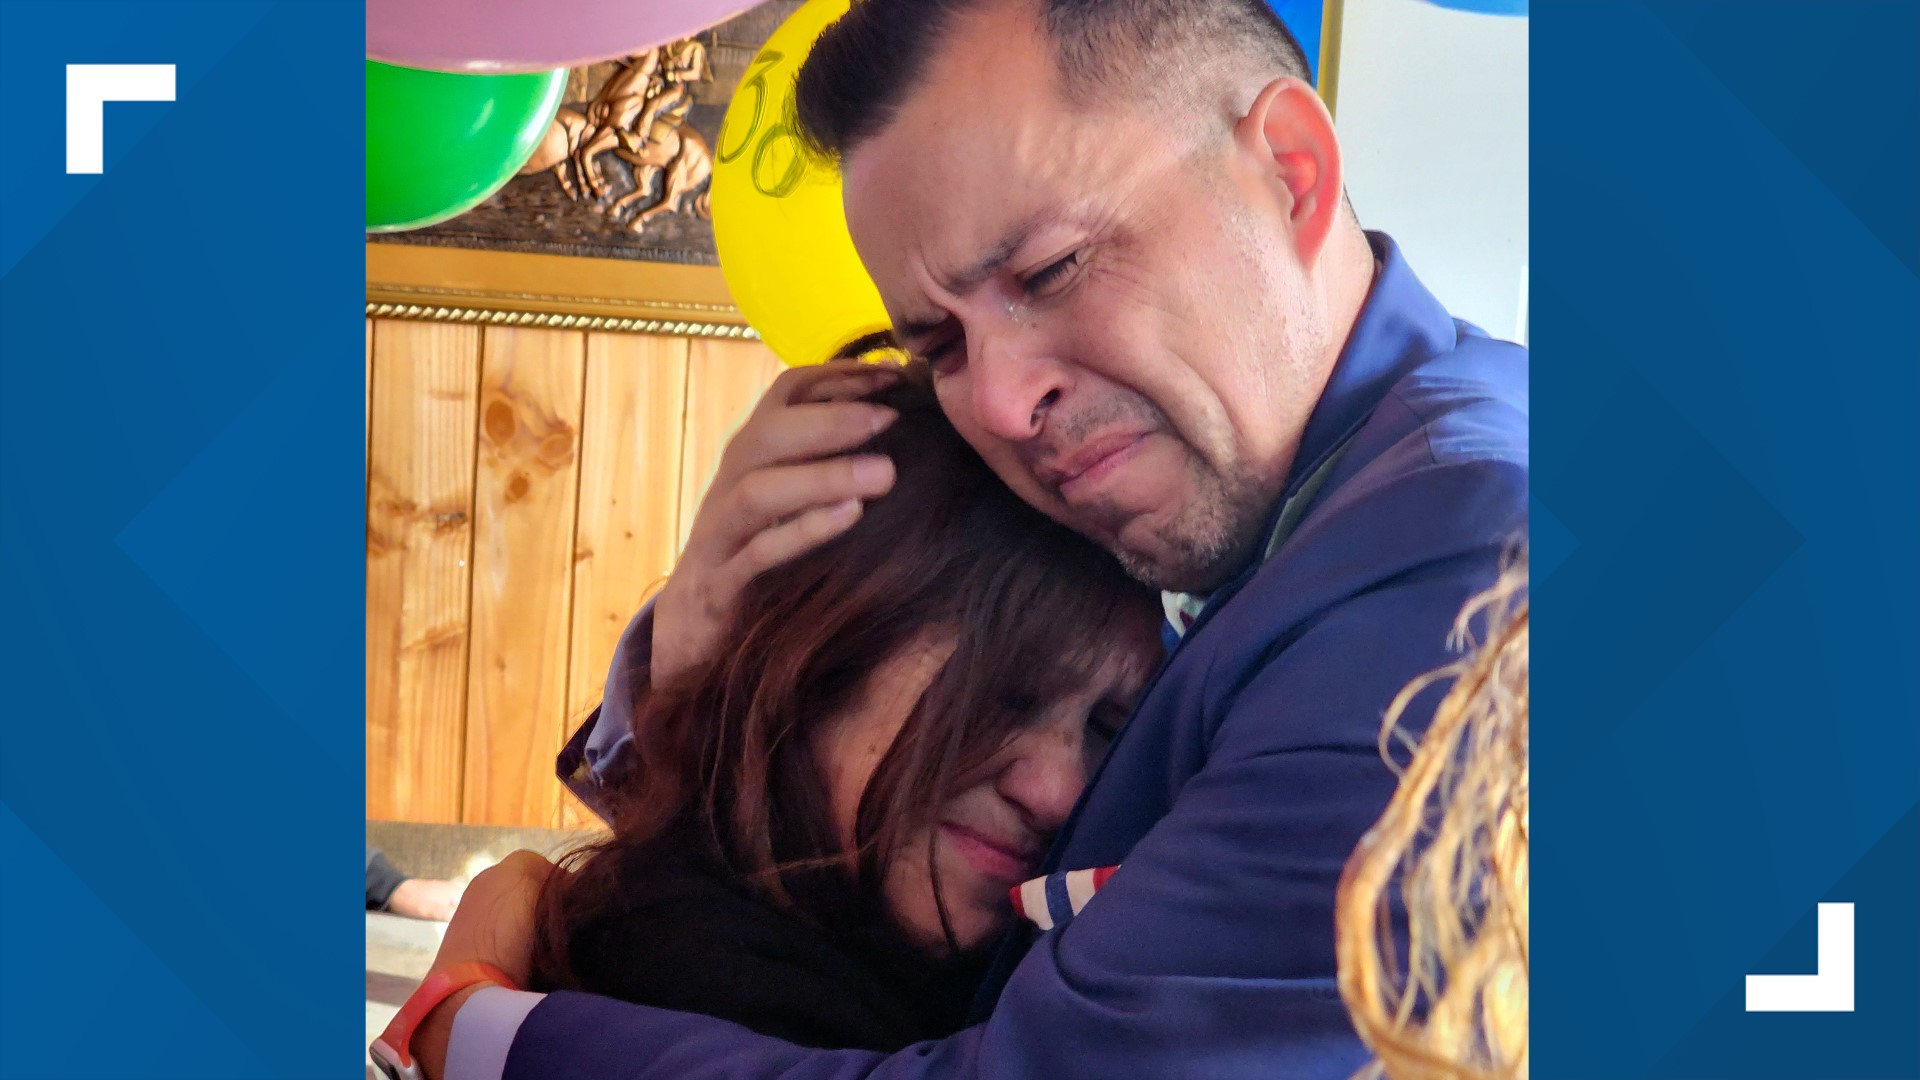 A 42-year-old Virginia man got to embrace his birth mother for the first time during a long-awaited family reunion in Valdivia, Chile.